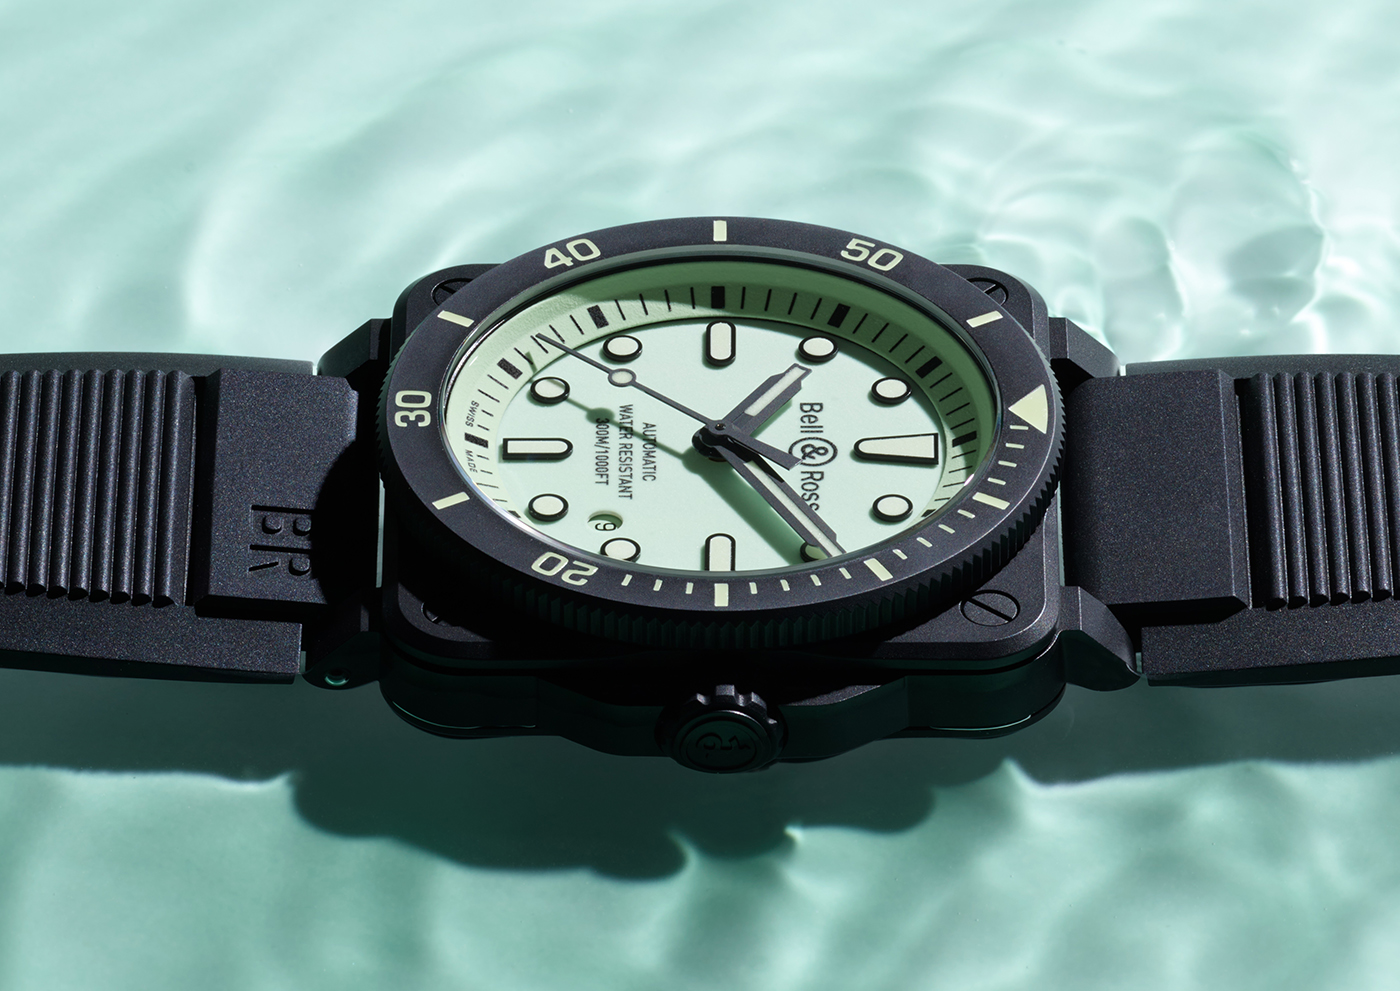 Watch discover. Military Diver. Br03 smp. One-man Military Diver Propulsion.